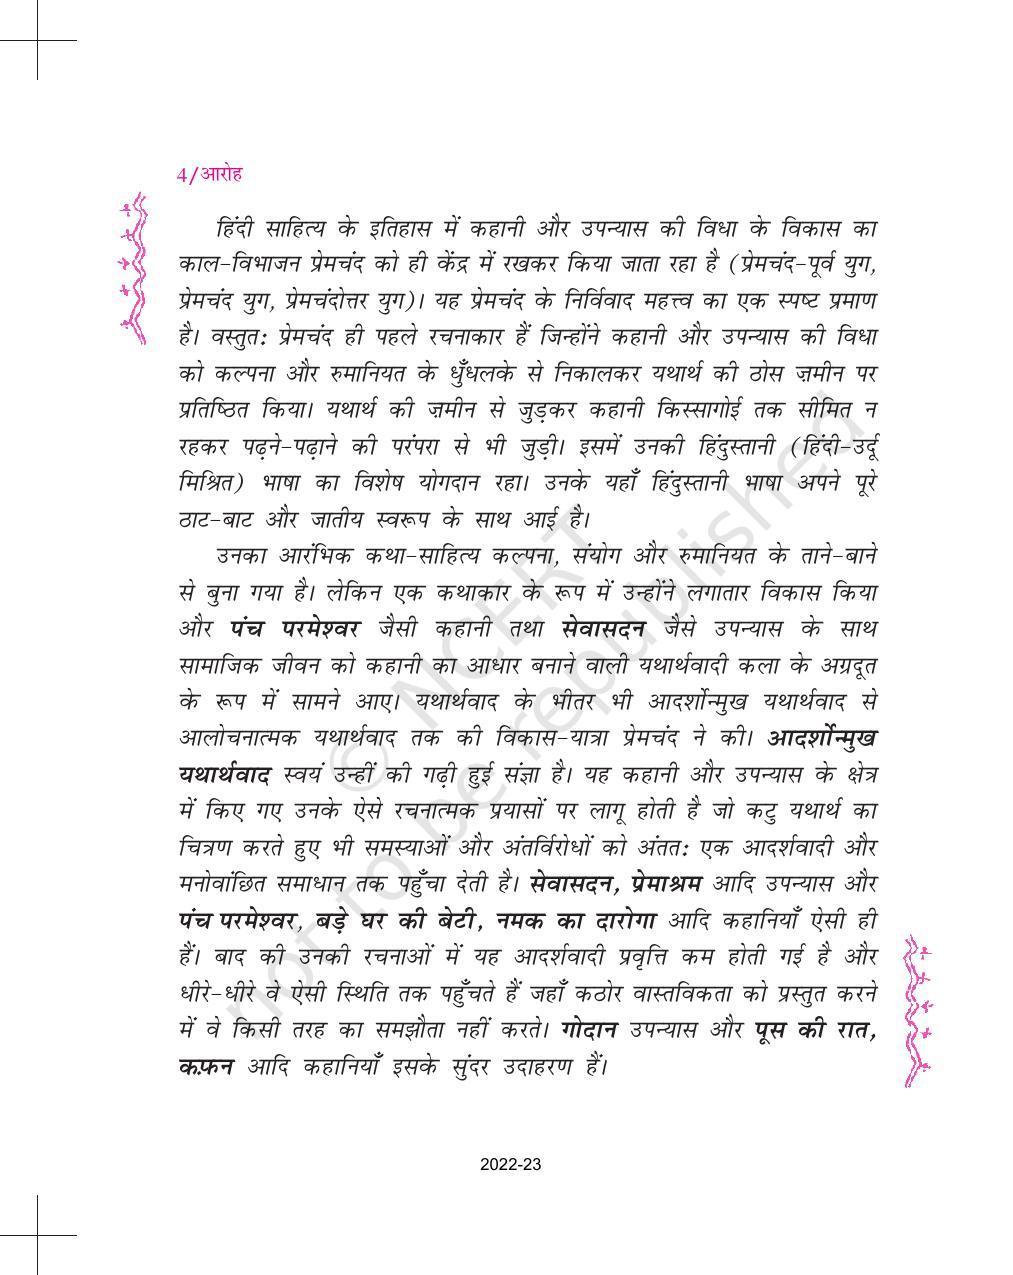 NCERT Book for Class 11 Hindi Aroh Chapter 1 नमक का दारोगा - Page 4